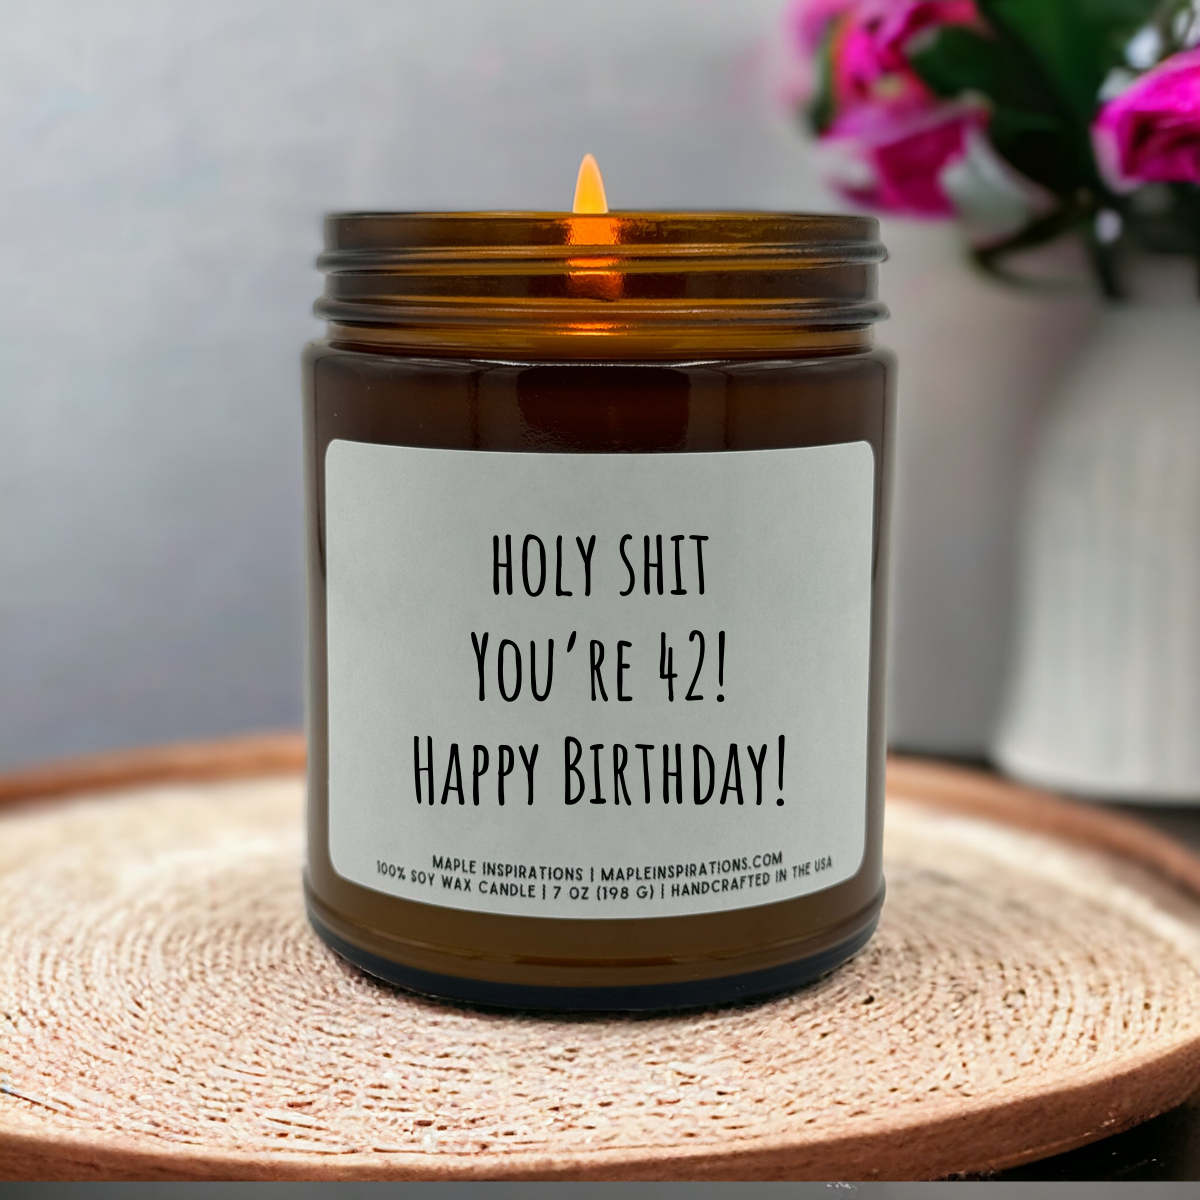 42nd Birthday Candle, Funny 42nd Birthday Gift, Funny Candle, Candle Gift, Gift For 42nd Birthday Turning 42 Years Old, Holy Shit You're 42